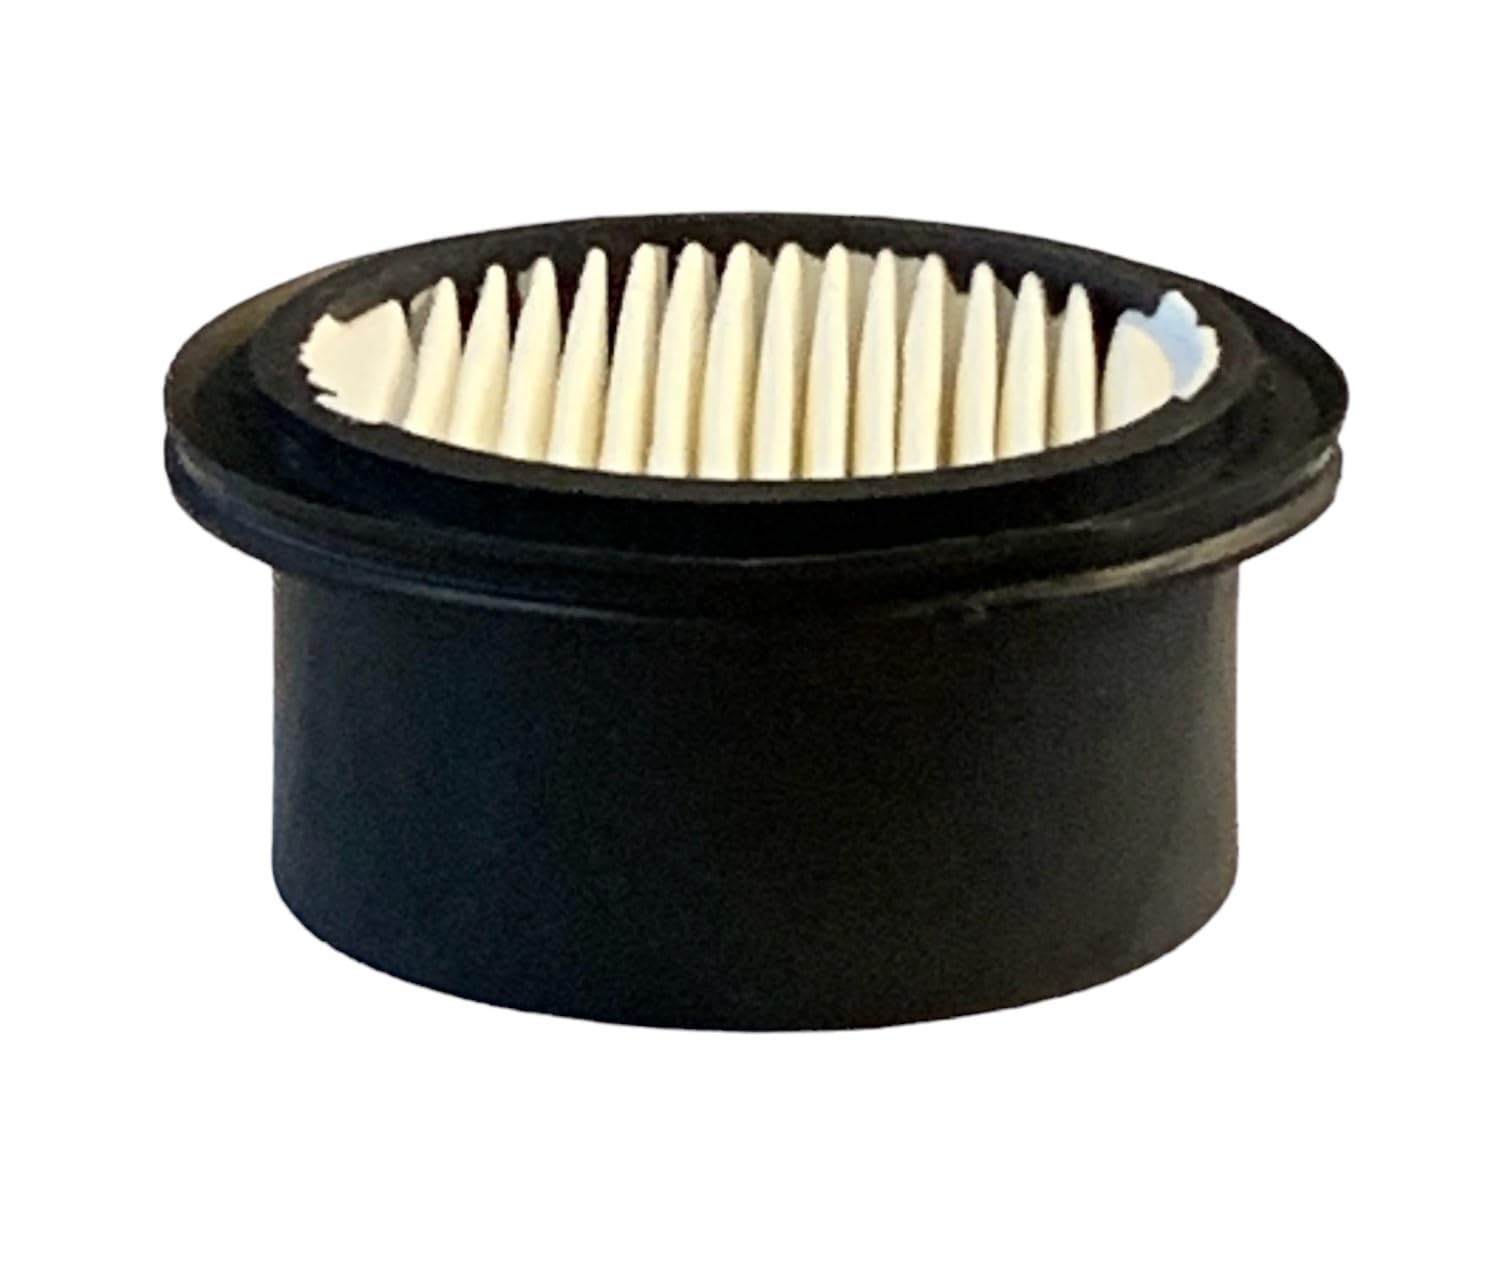 Sellerocity American Made 3 Inch Outside Diameter (Measure Your Filter, Please) Compressor Air Filter, High Pleat Count Element Compatible with Dewalt Craftsman Porter Cable AC-0331